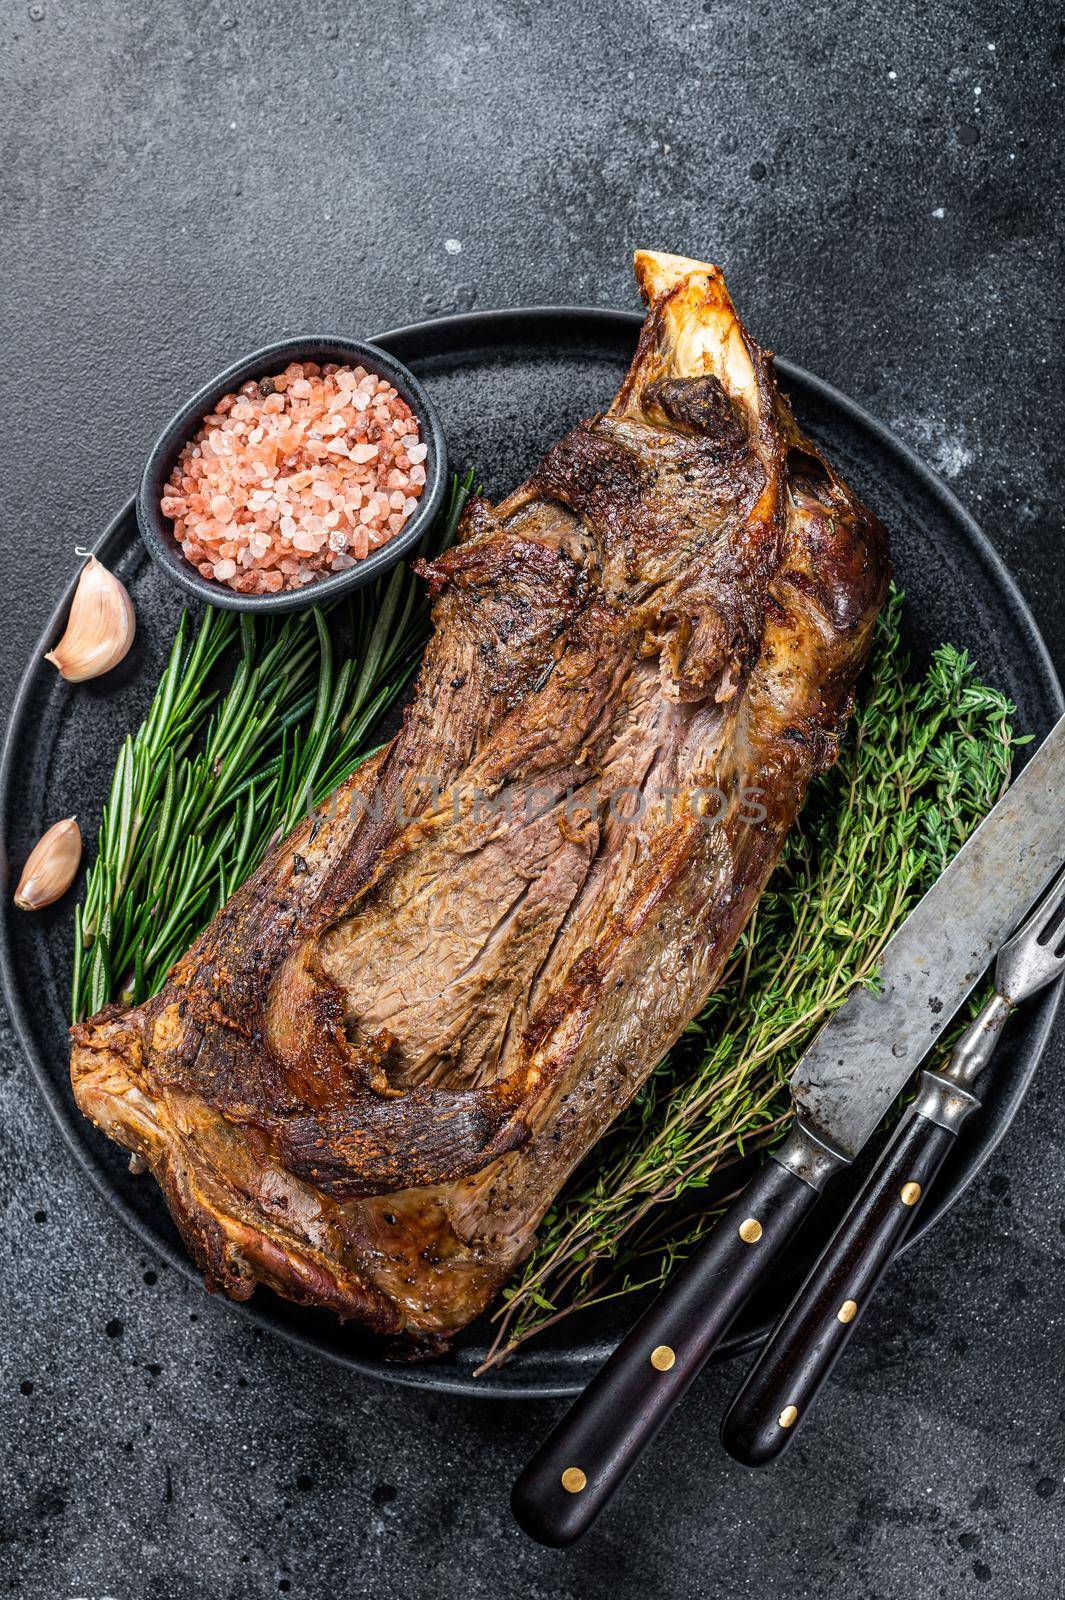 Roasted lamb mutton shoulder meat on a plate with knife and fork. Black background. Top view by Composter